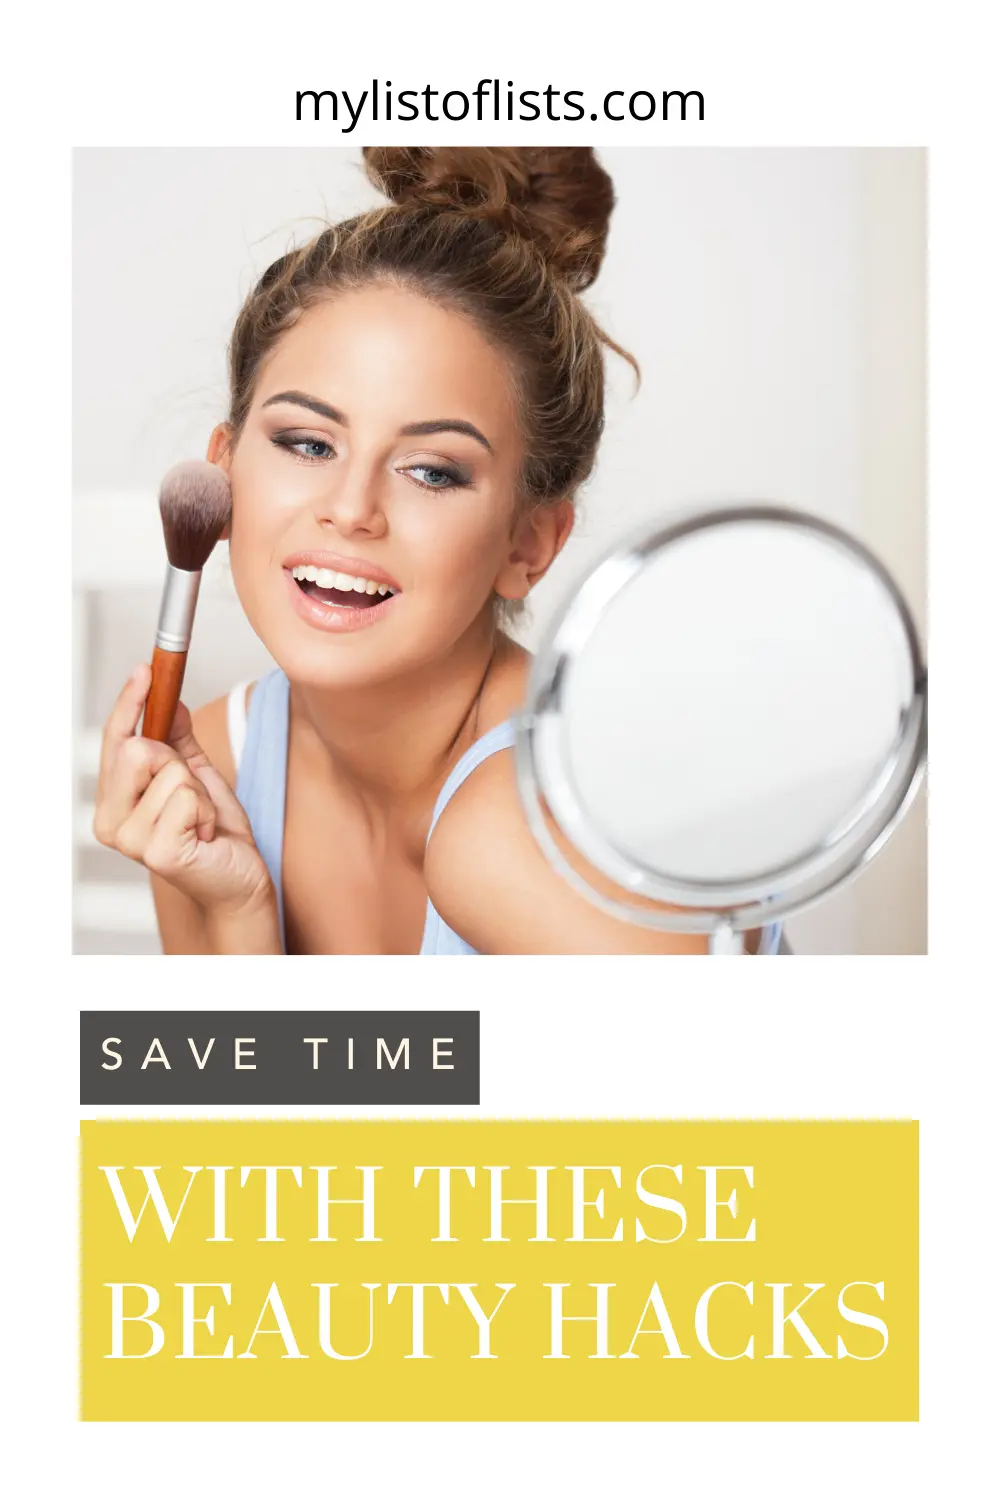 Mylistoflists.com will make you more efficient in all you do. Find tons of simple hacks to save more time. Spend less time on your morning routine with these clever beauty tips you absolutely need to know!